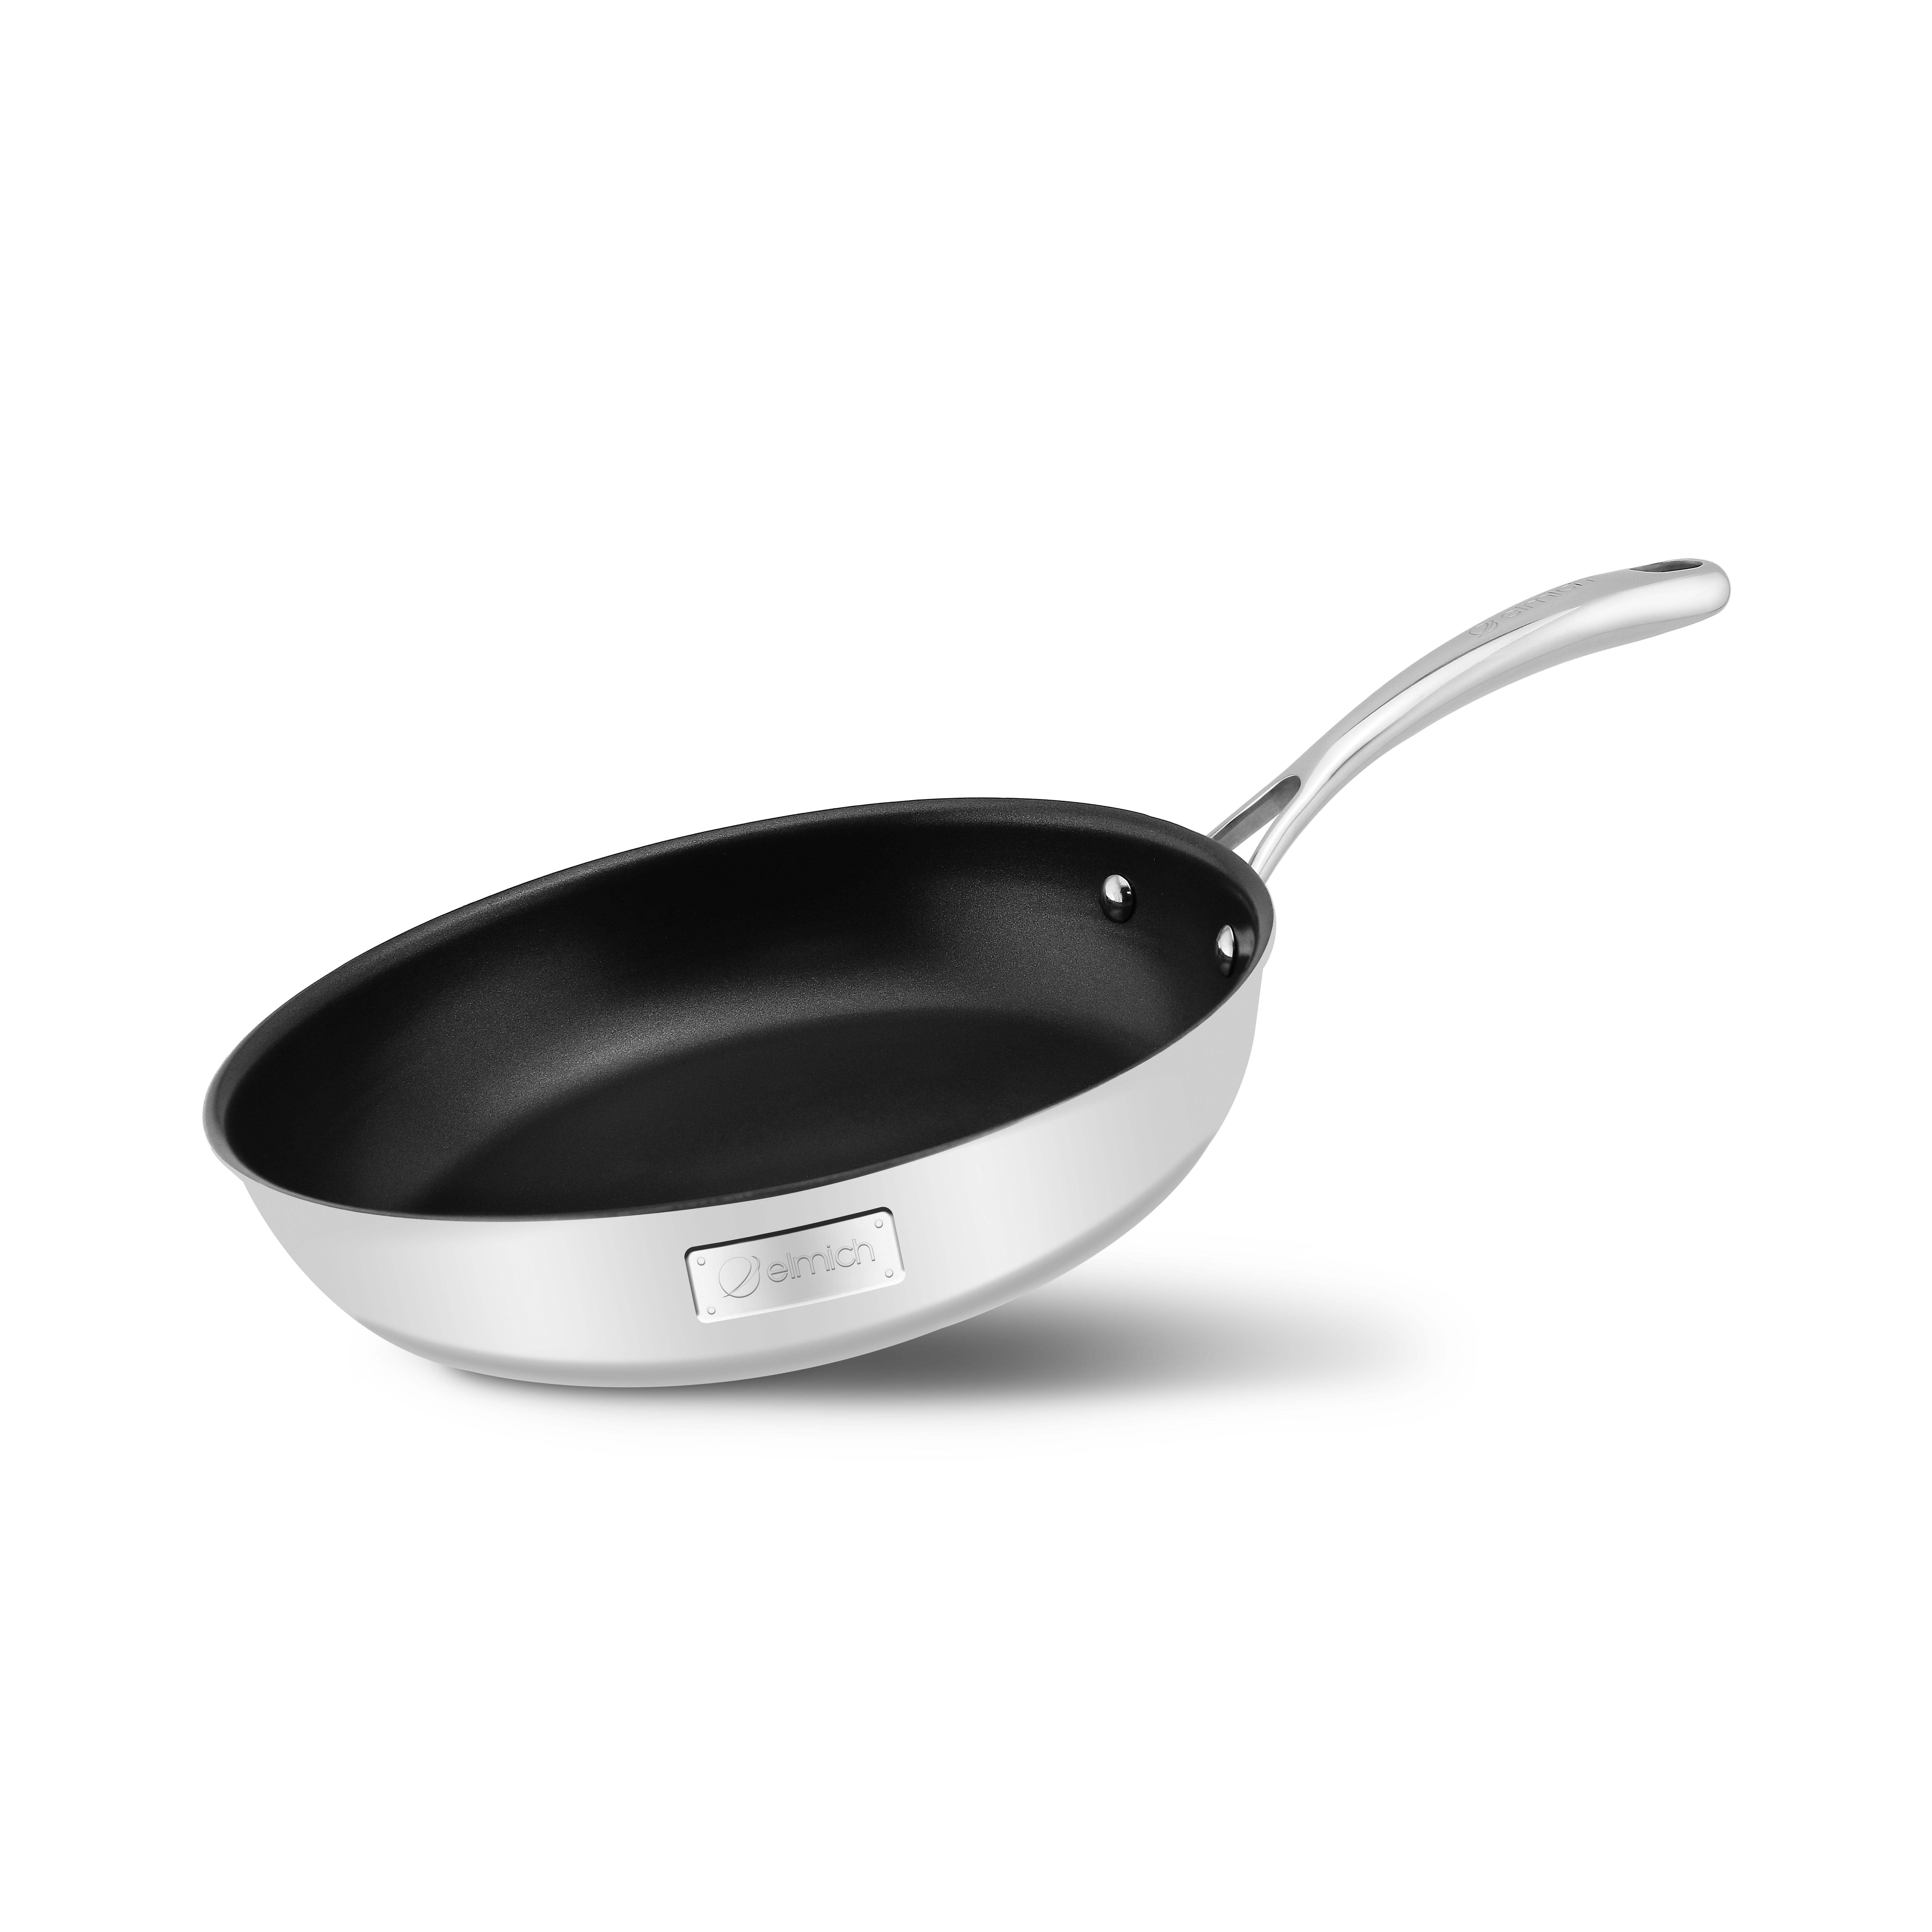 High-grade stainless steel pan with 2 layers of seamless bottom Tri-Max 26cm